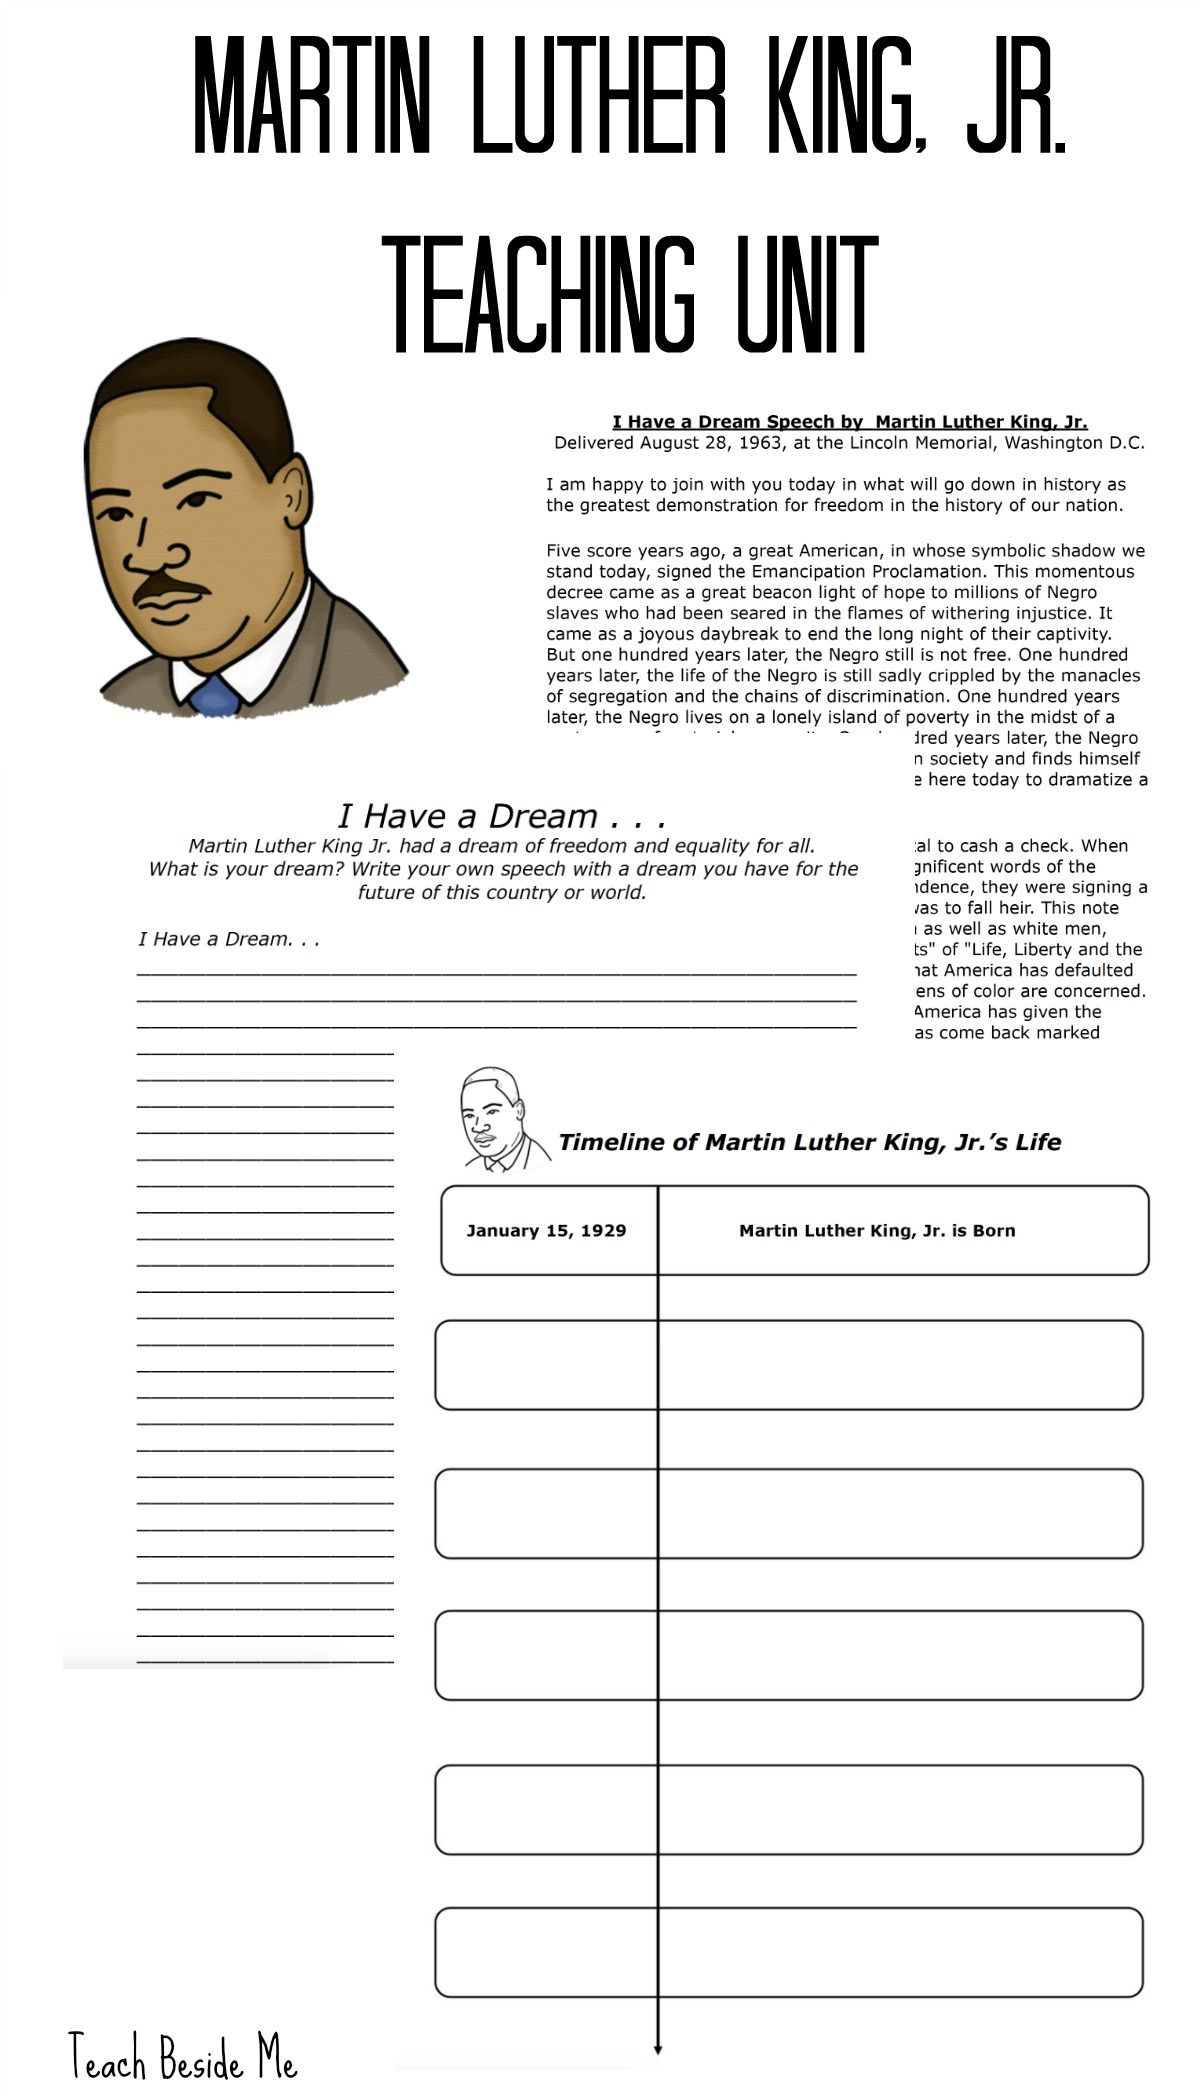 Martin Luther King Jr. Lesson Ideas | Martin Luther King Jr